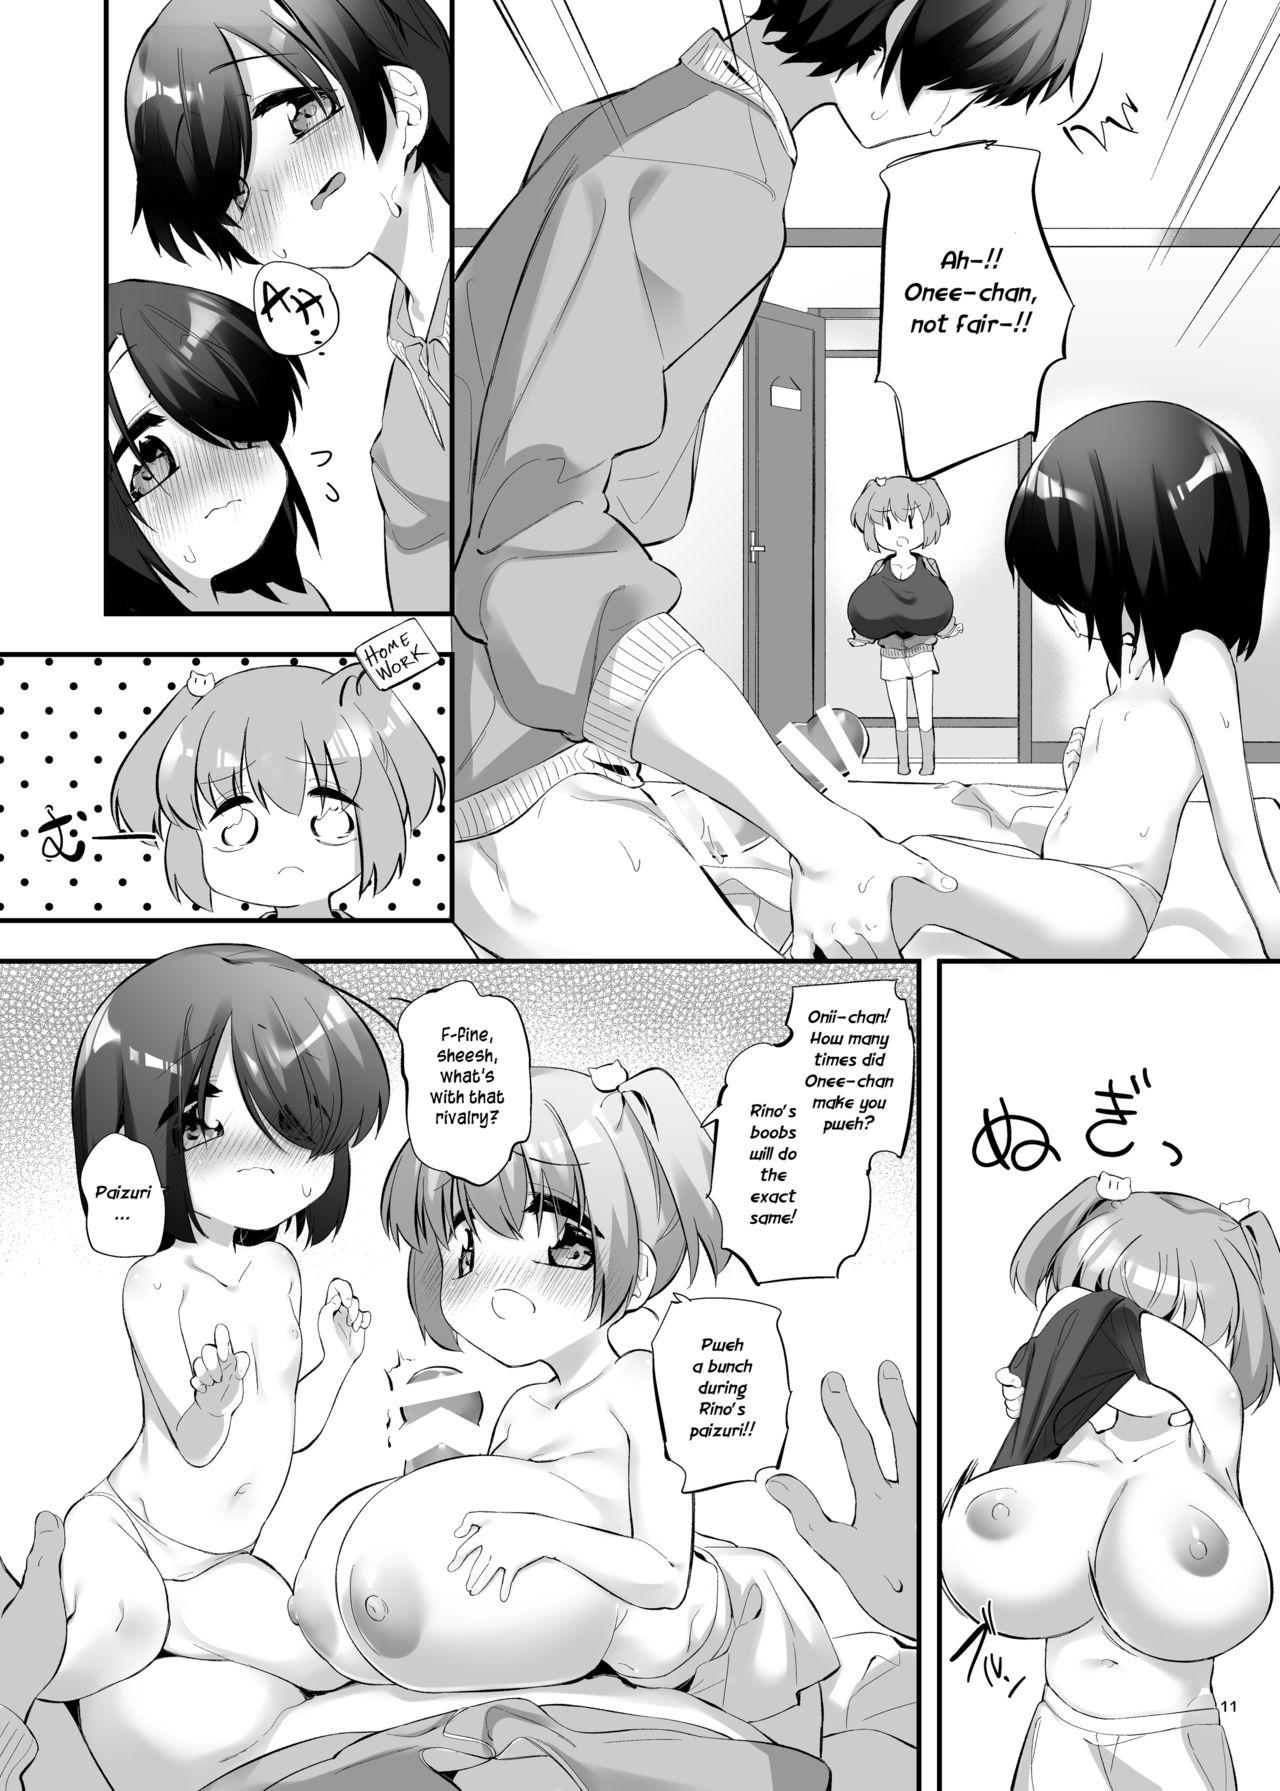 Rope Imouto ni Hasamarete Shiawase Desho? 3 | Between Sisters, Are You Happy? 3 - Original Free 18 Year Old Porn - Page 10